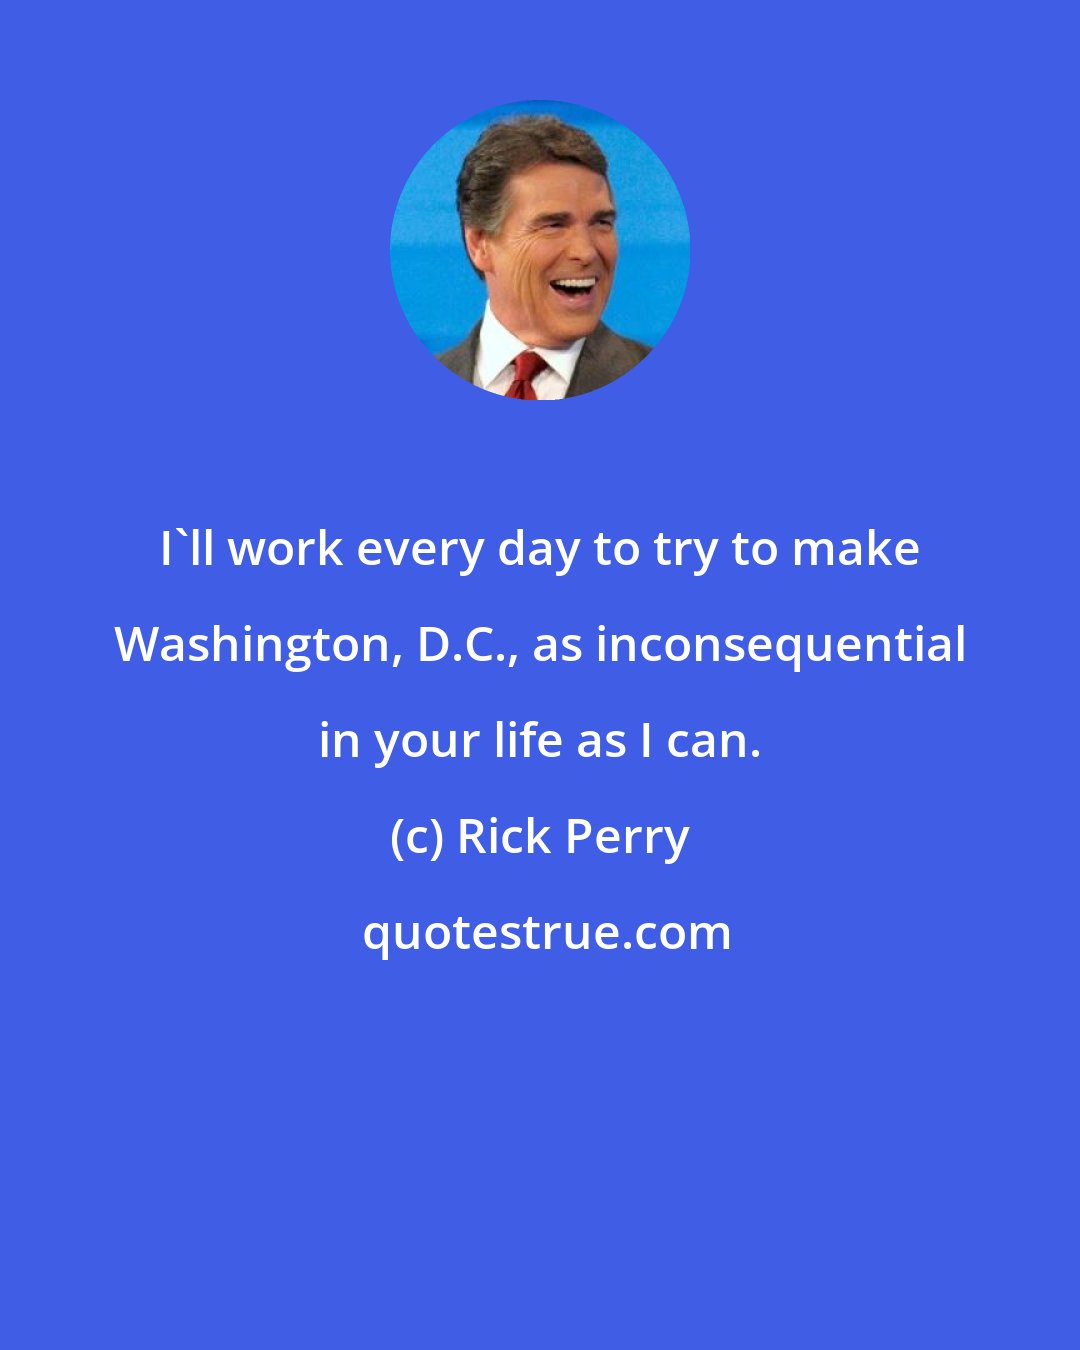 Rick Perry: I'll work every day to try to make Washington, D.C., as inconsequential in your life as I can.